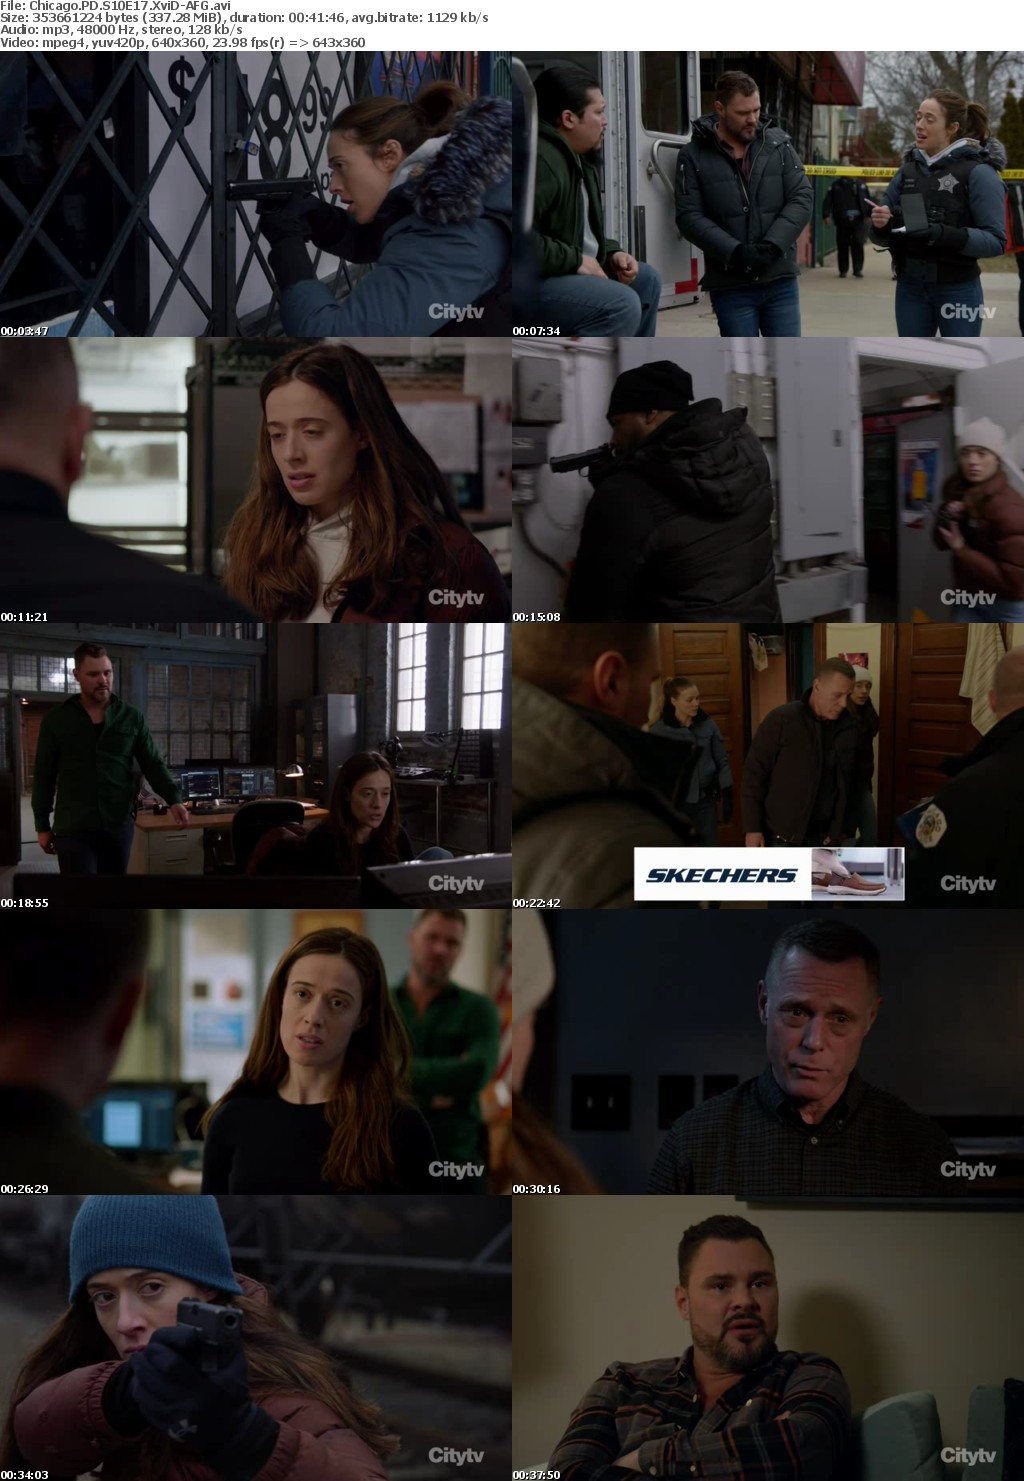 Chicago PD S10E17 XviD-AFG